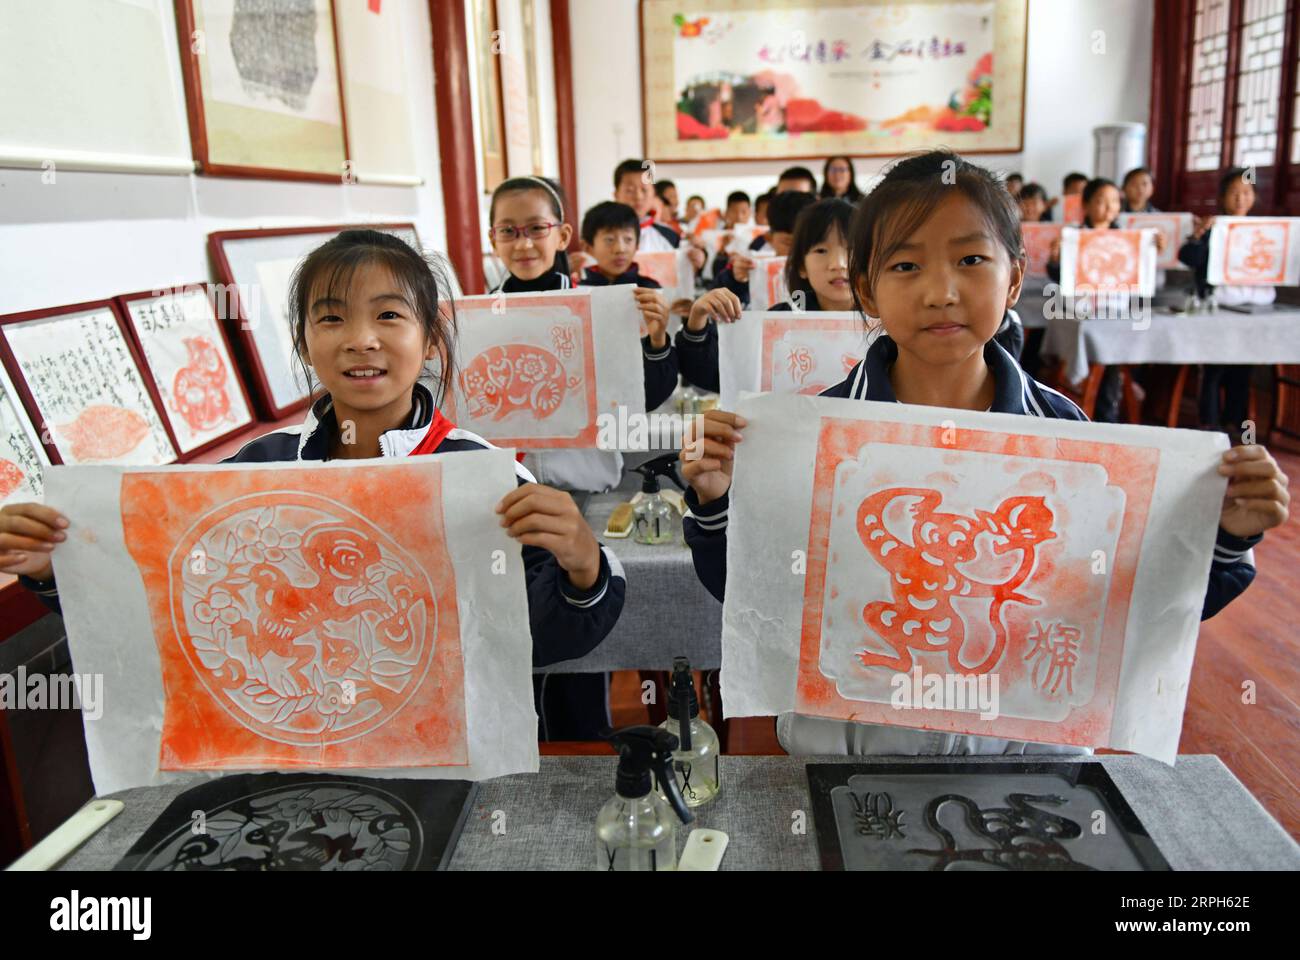 191031 -- JINAN, Oct. 31, 2019 -- Pupils of Xixian primary school show their rubbing artworks at Lubei intangible cultural heritage experiencing center in Wudi County, east China s Shandong Province, Oct. 30, 2019. The experiencing center provides a variety of intangible cultural heritage experiencing programs, including the arts of rubbing, ceramics, tie dyeing, paper-making and movable-type printing, aiming to promote traditional Chinese culture through immersive experience.  CHINA-SHANDONG-JINAN-INTANGIBLE CULTURAL HERITAGE-CENTER CN ZhuxZheng PUBLICATIONxNOTxINxCHN Stock Photo